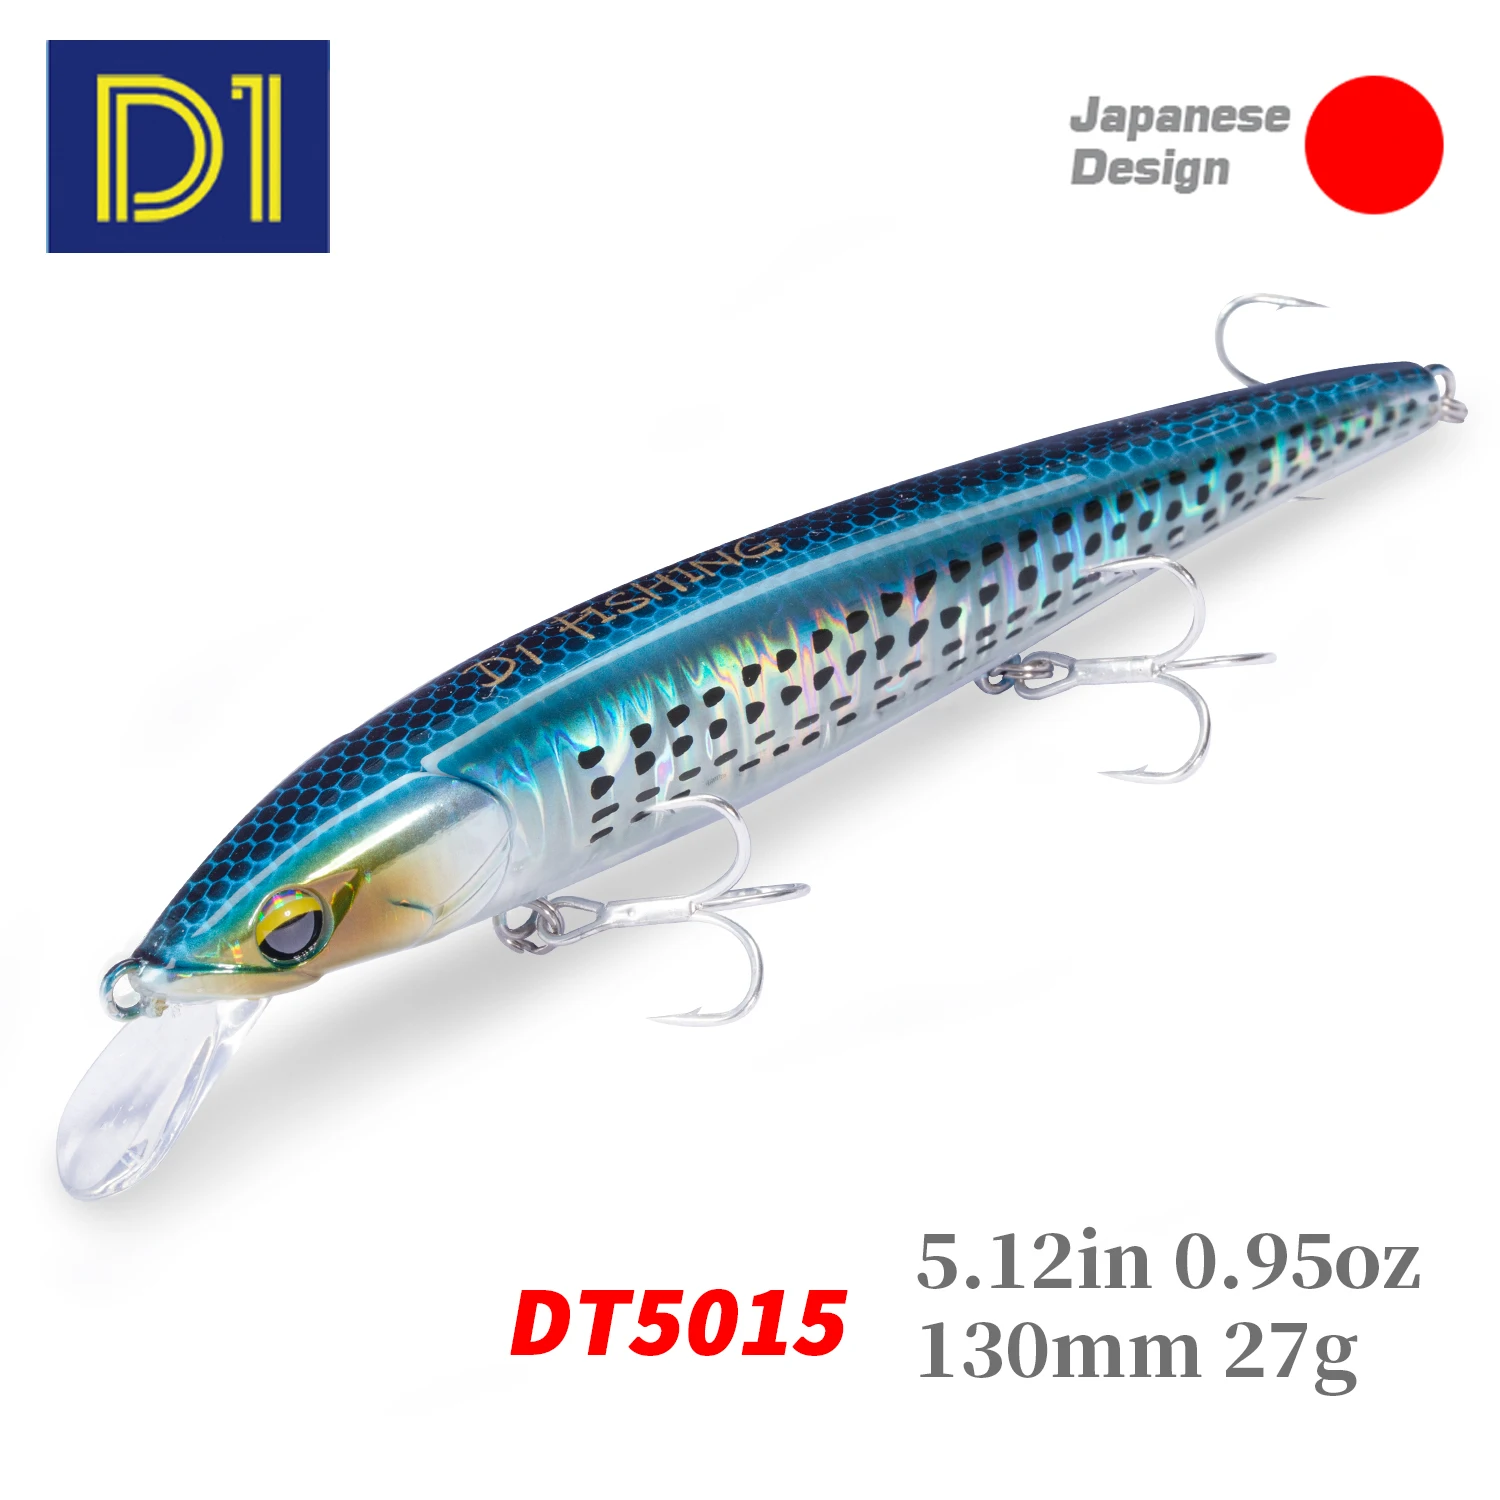 D1 Minnow Lures EJA 130 Sinking 27g Sea Fishing Hard Artificial Wobblers Depth 40-70cm Long Casting Jerkbait 2021 pescar Tackle ccltba 10cm 16 5g multi jointed swimbait hard plastic wobblers minnow crankbait sinking artificial fishing lures tackle